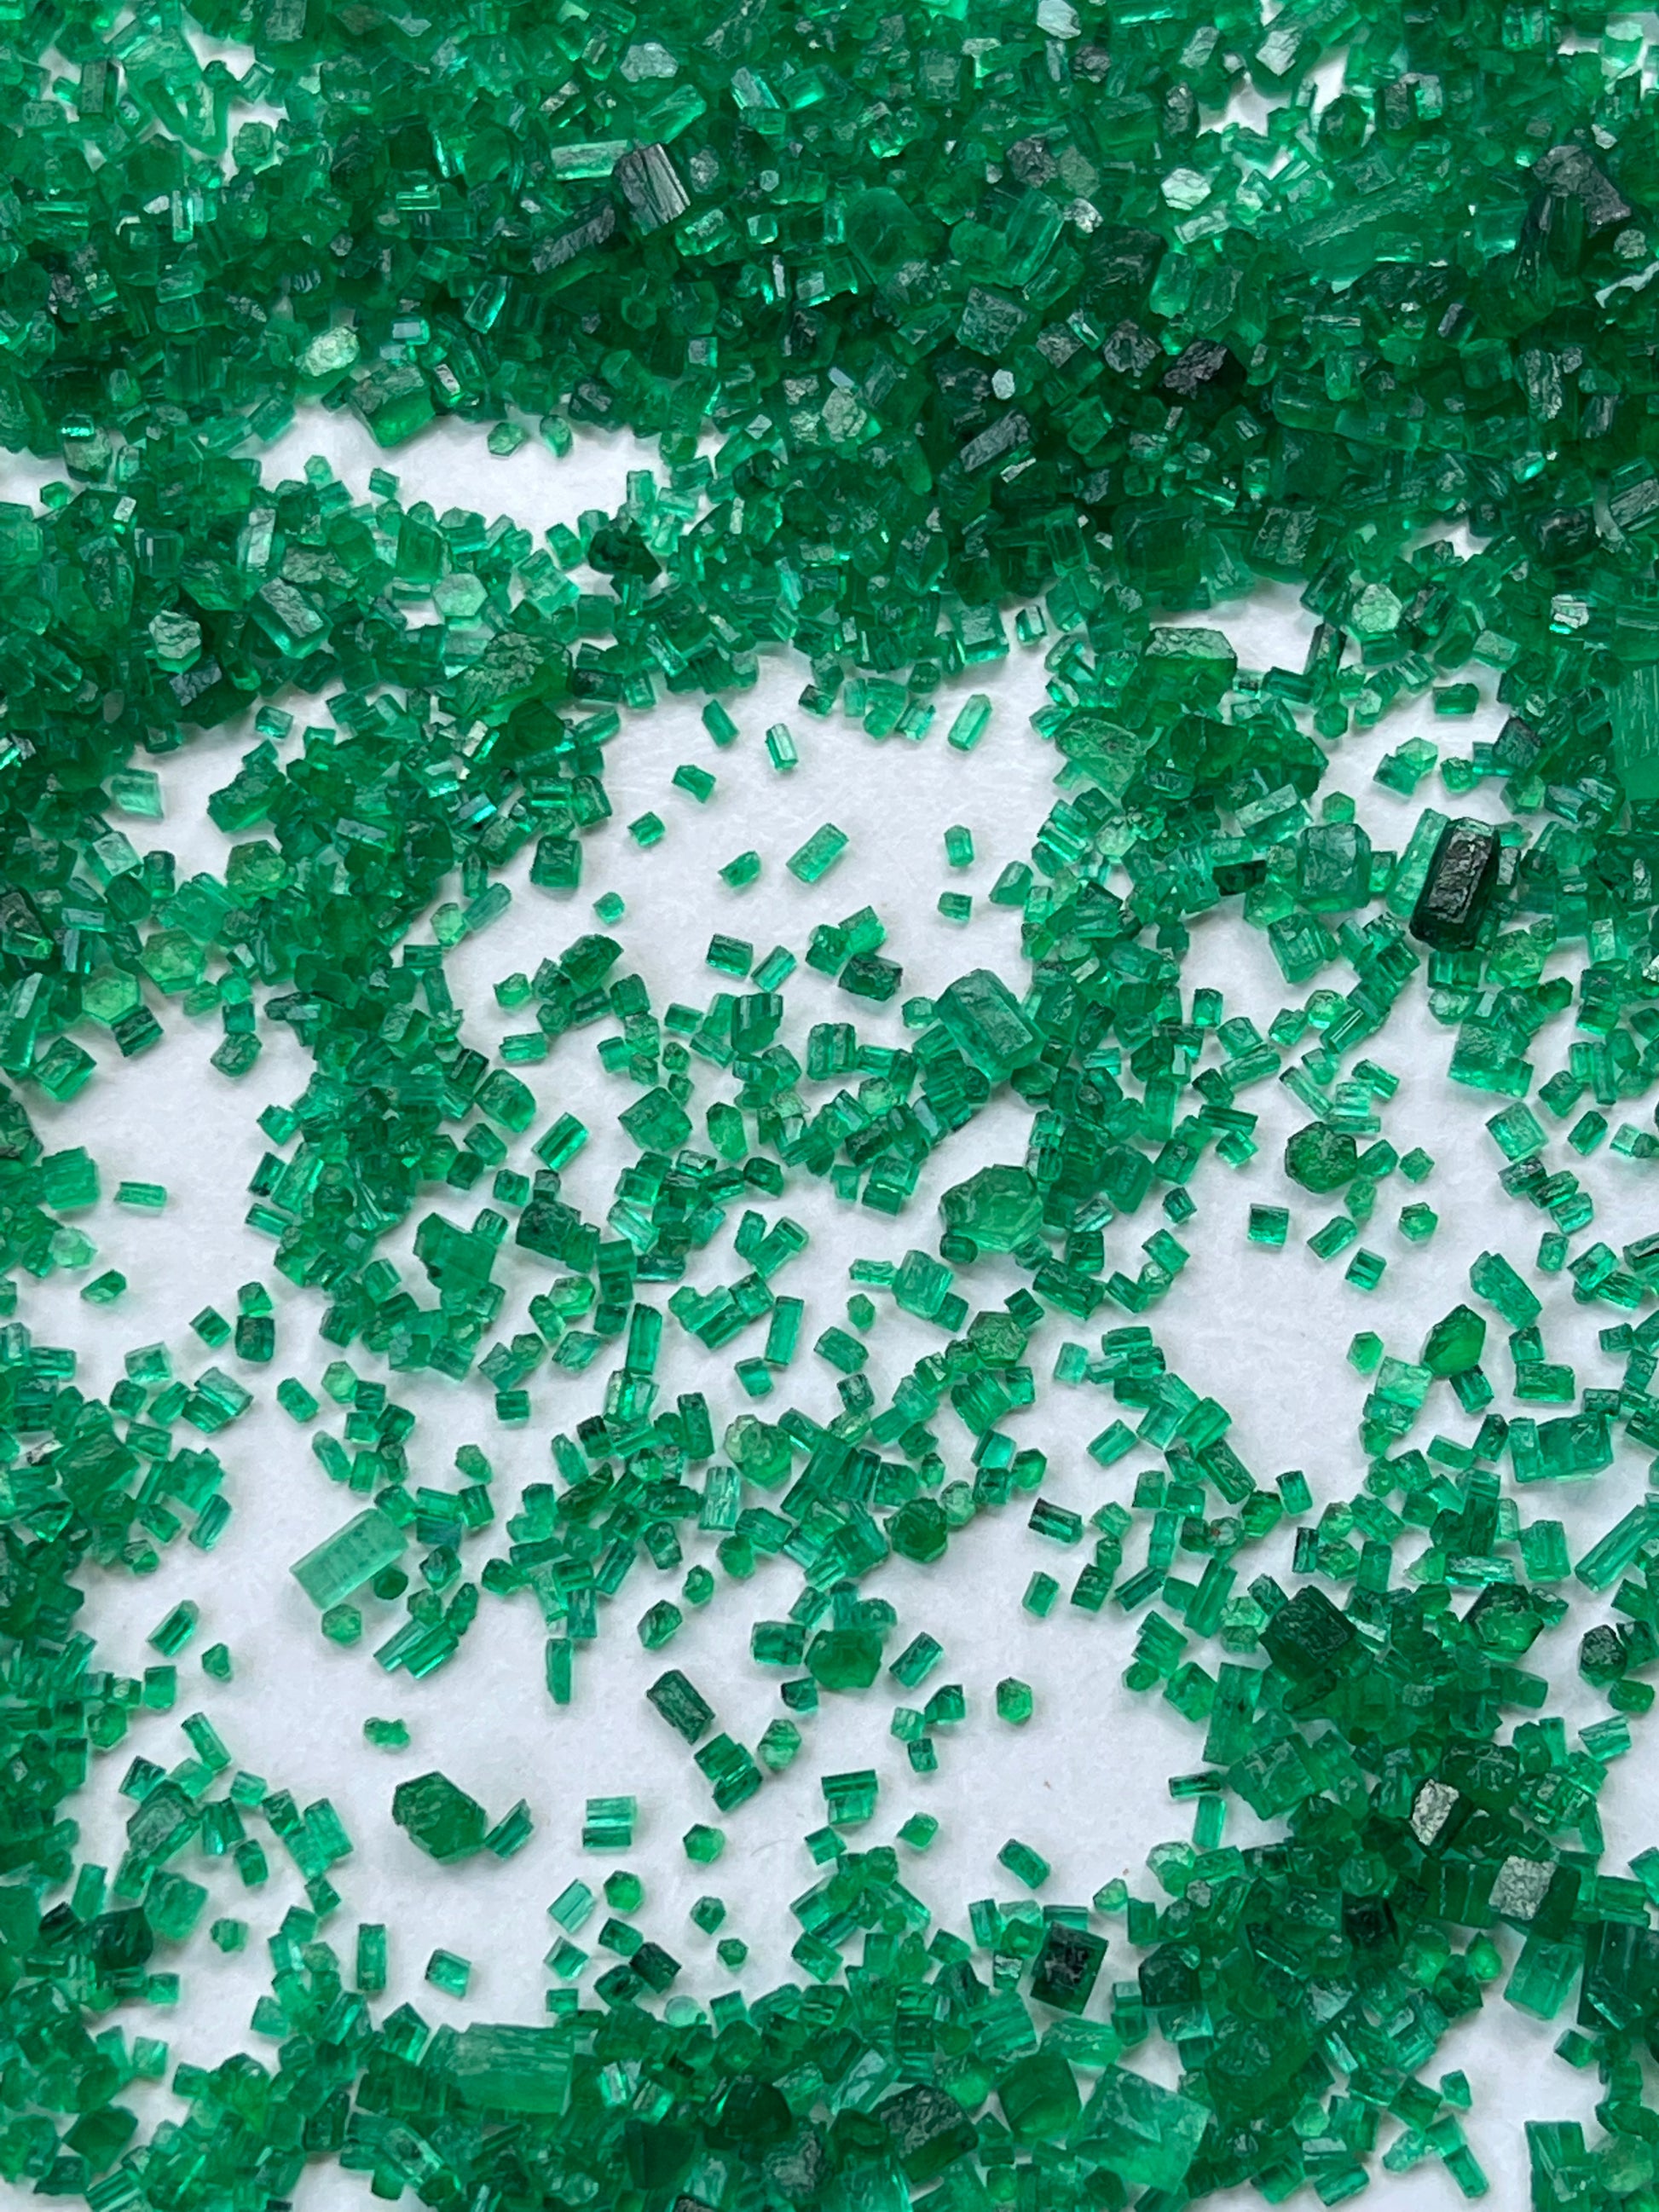 Buy Raw Melee Size Swat Emeralds for faceting